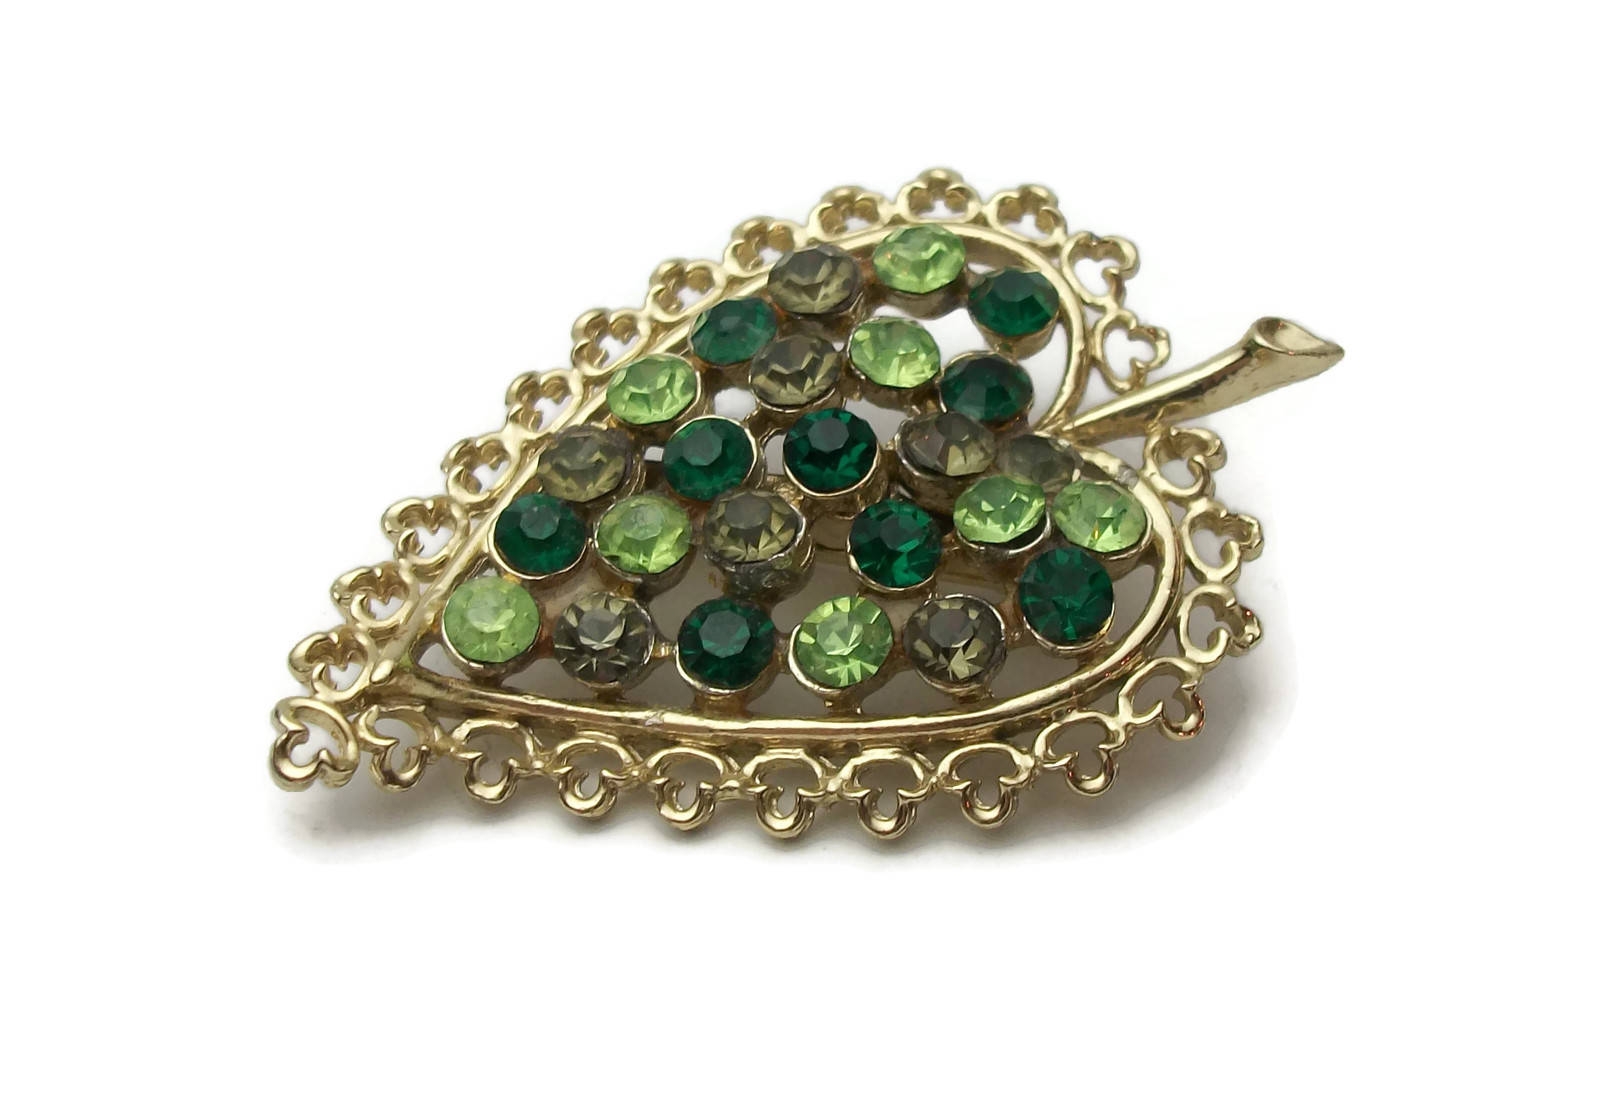 Vintage Pin Brooch Gold Toned Floral Leaf Design With Brown Rhinestones  Green & Enamel Used - Yahoo Shopping